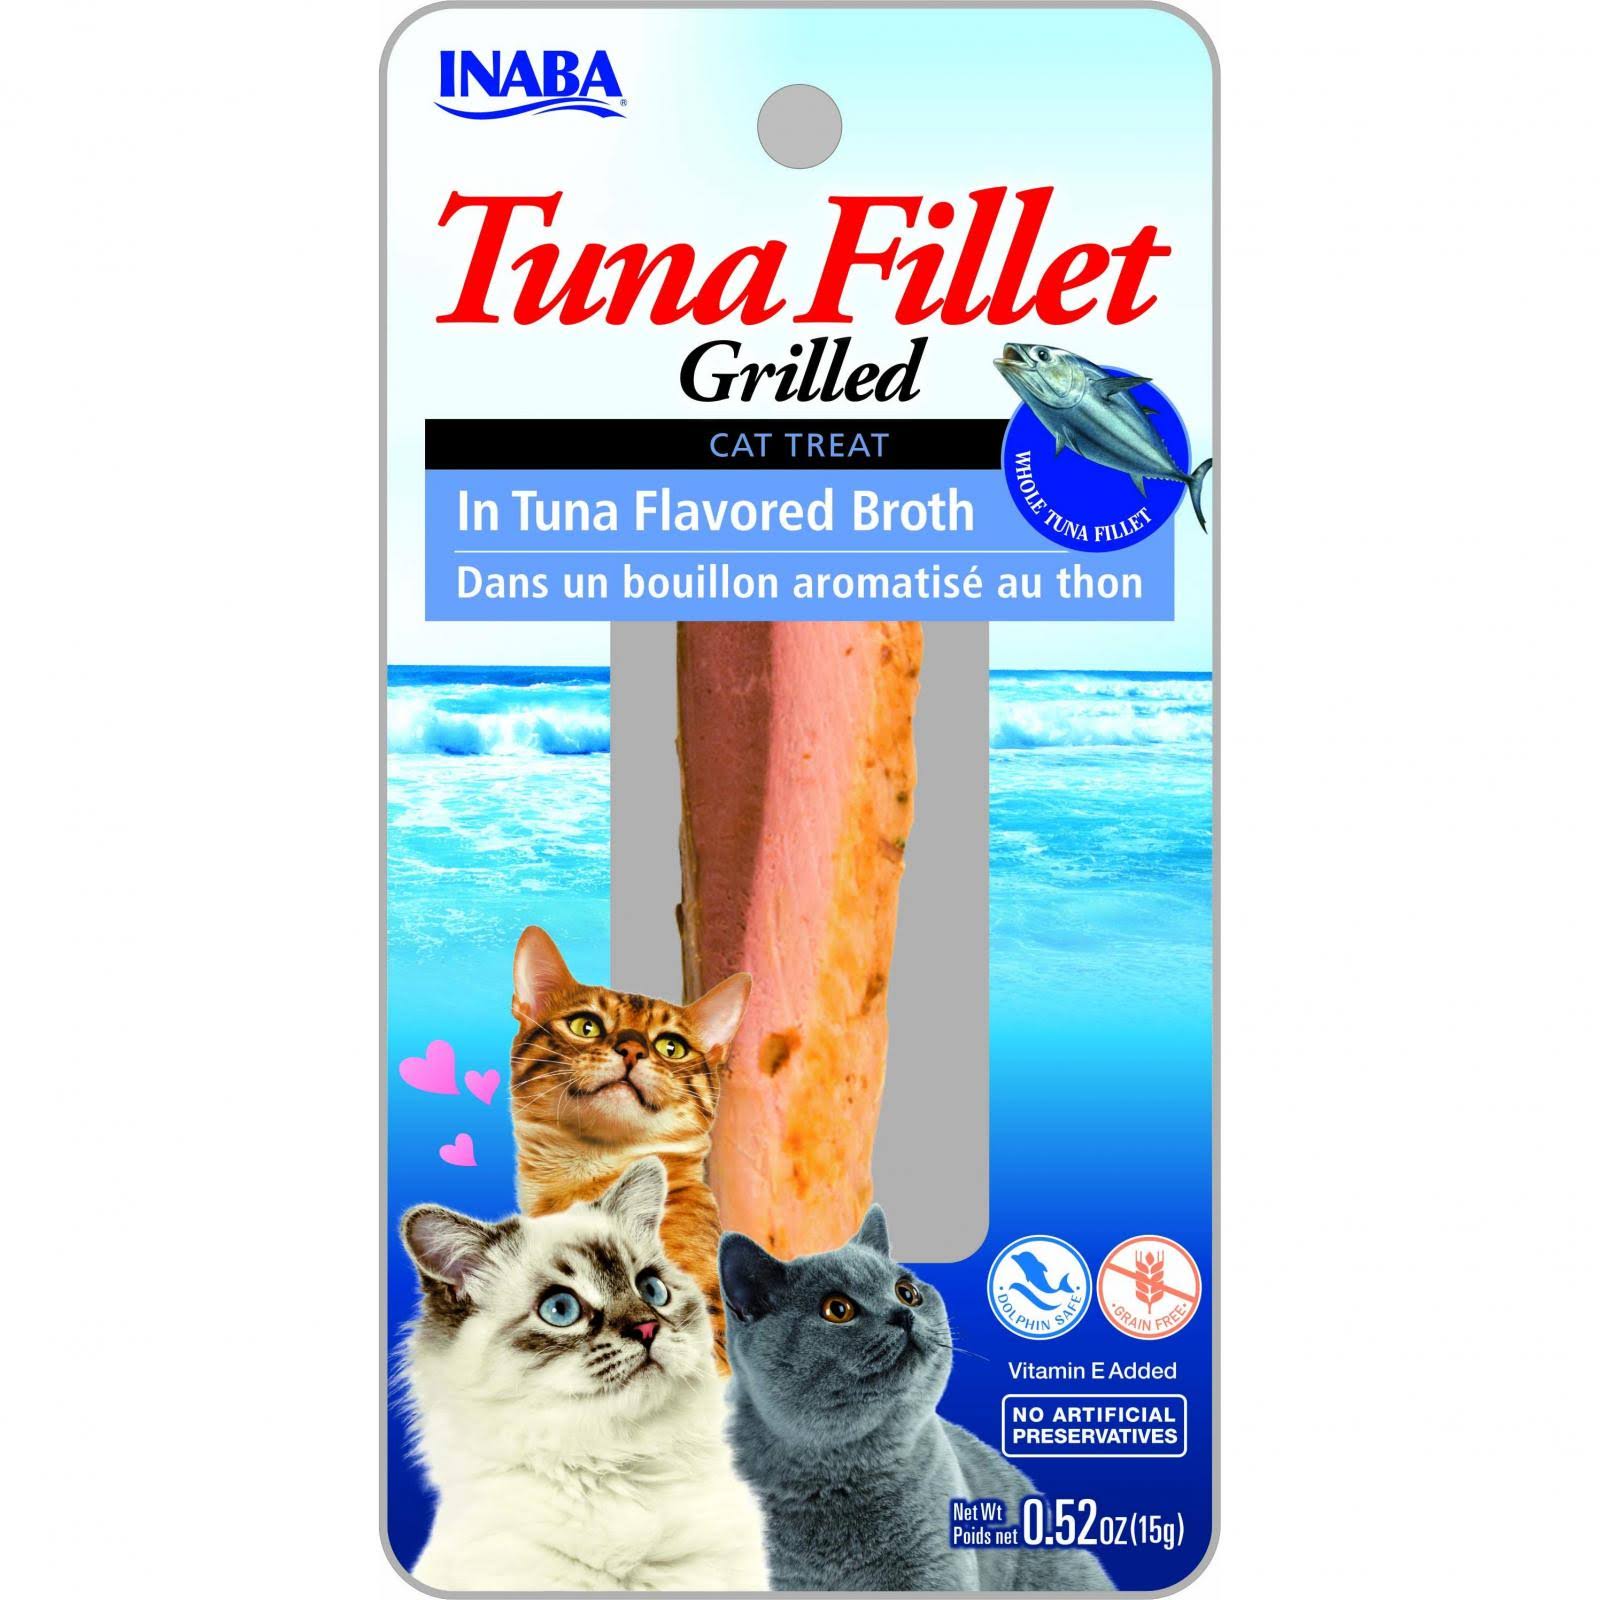 Inaba Grilled Tuna Fillet in Tuna Flavoured Broth Cat Treats